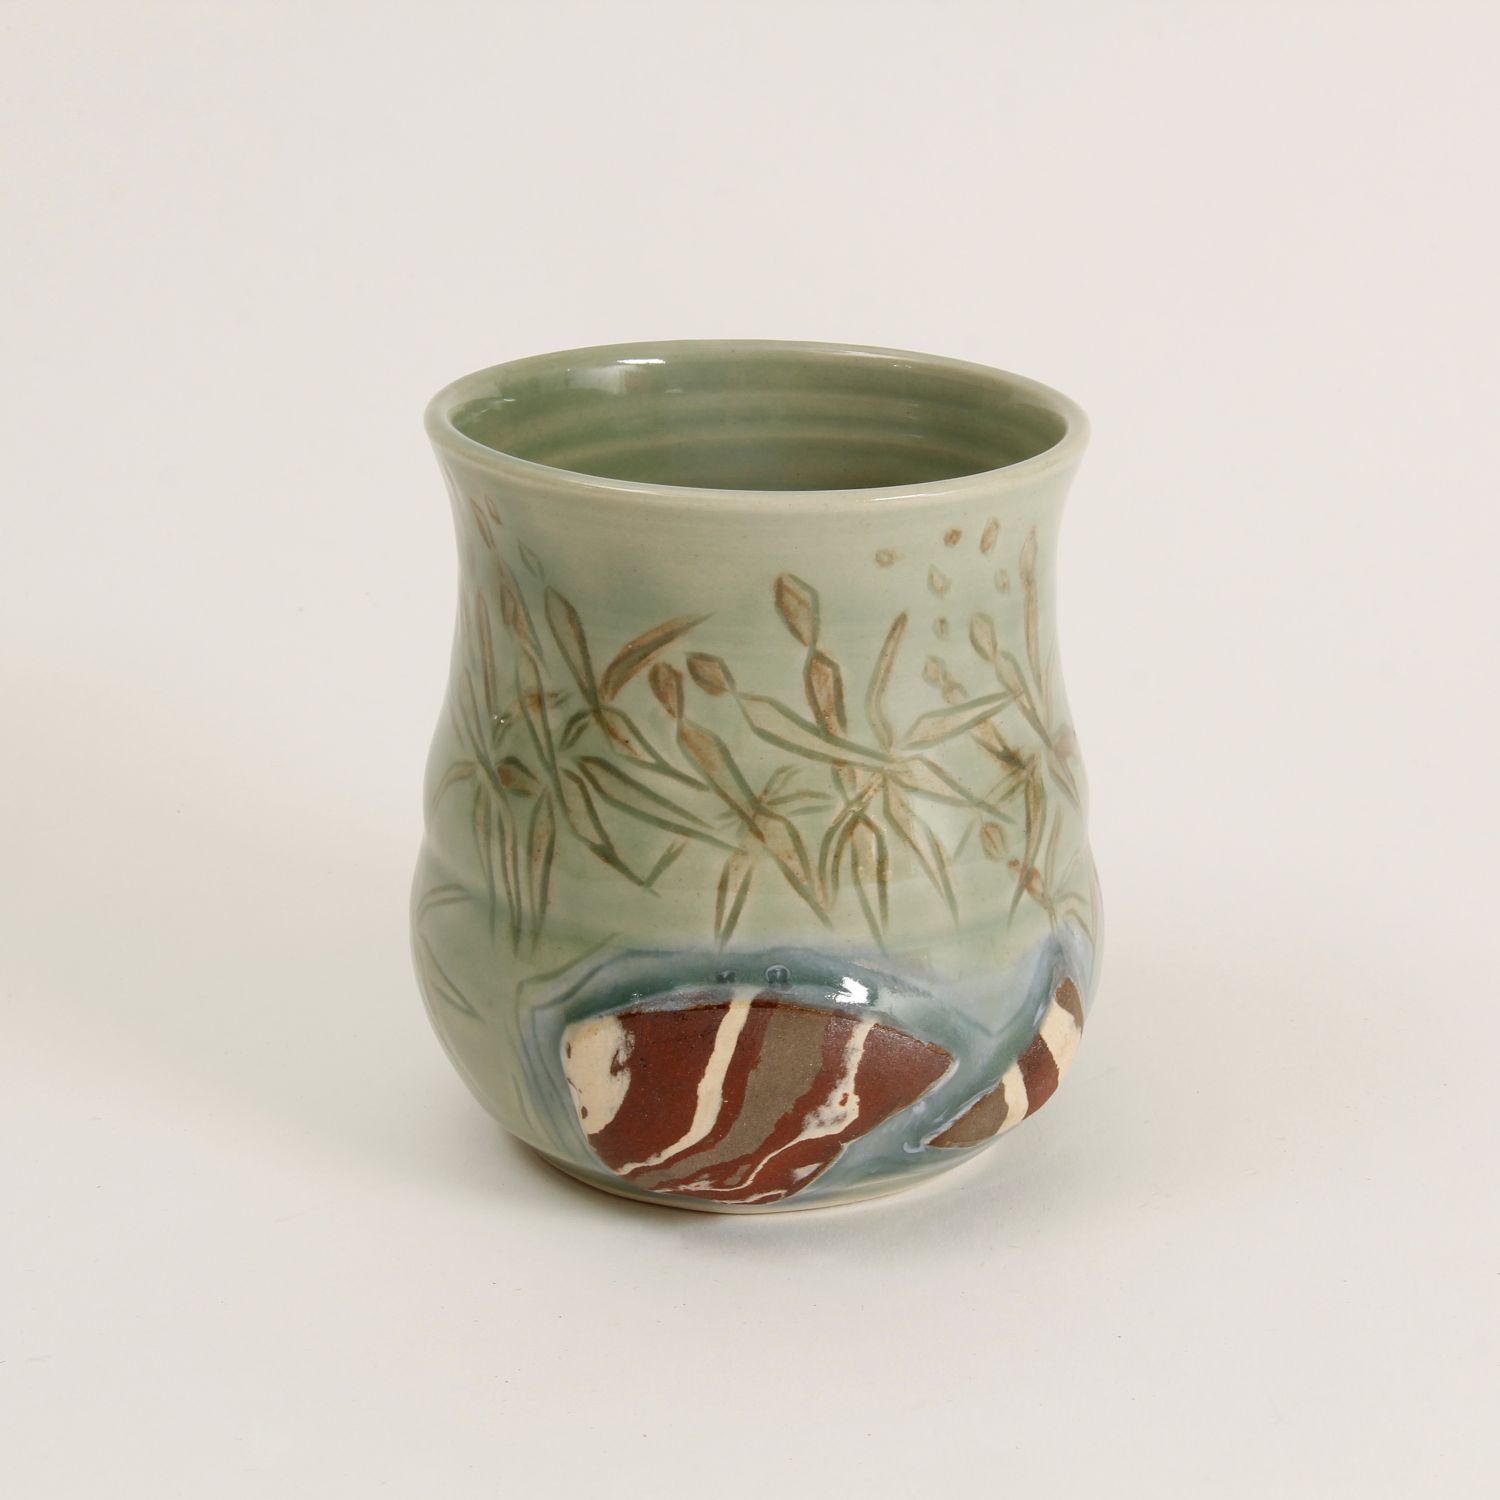 Kristina Rose Studios: Floral Cup (Each sold separately) Product Image 4 of 4